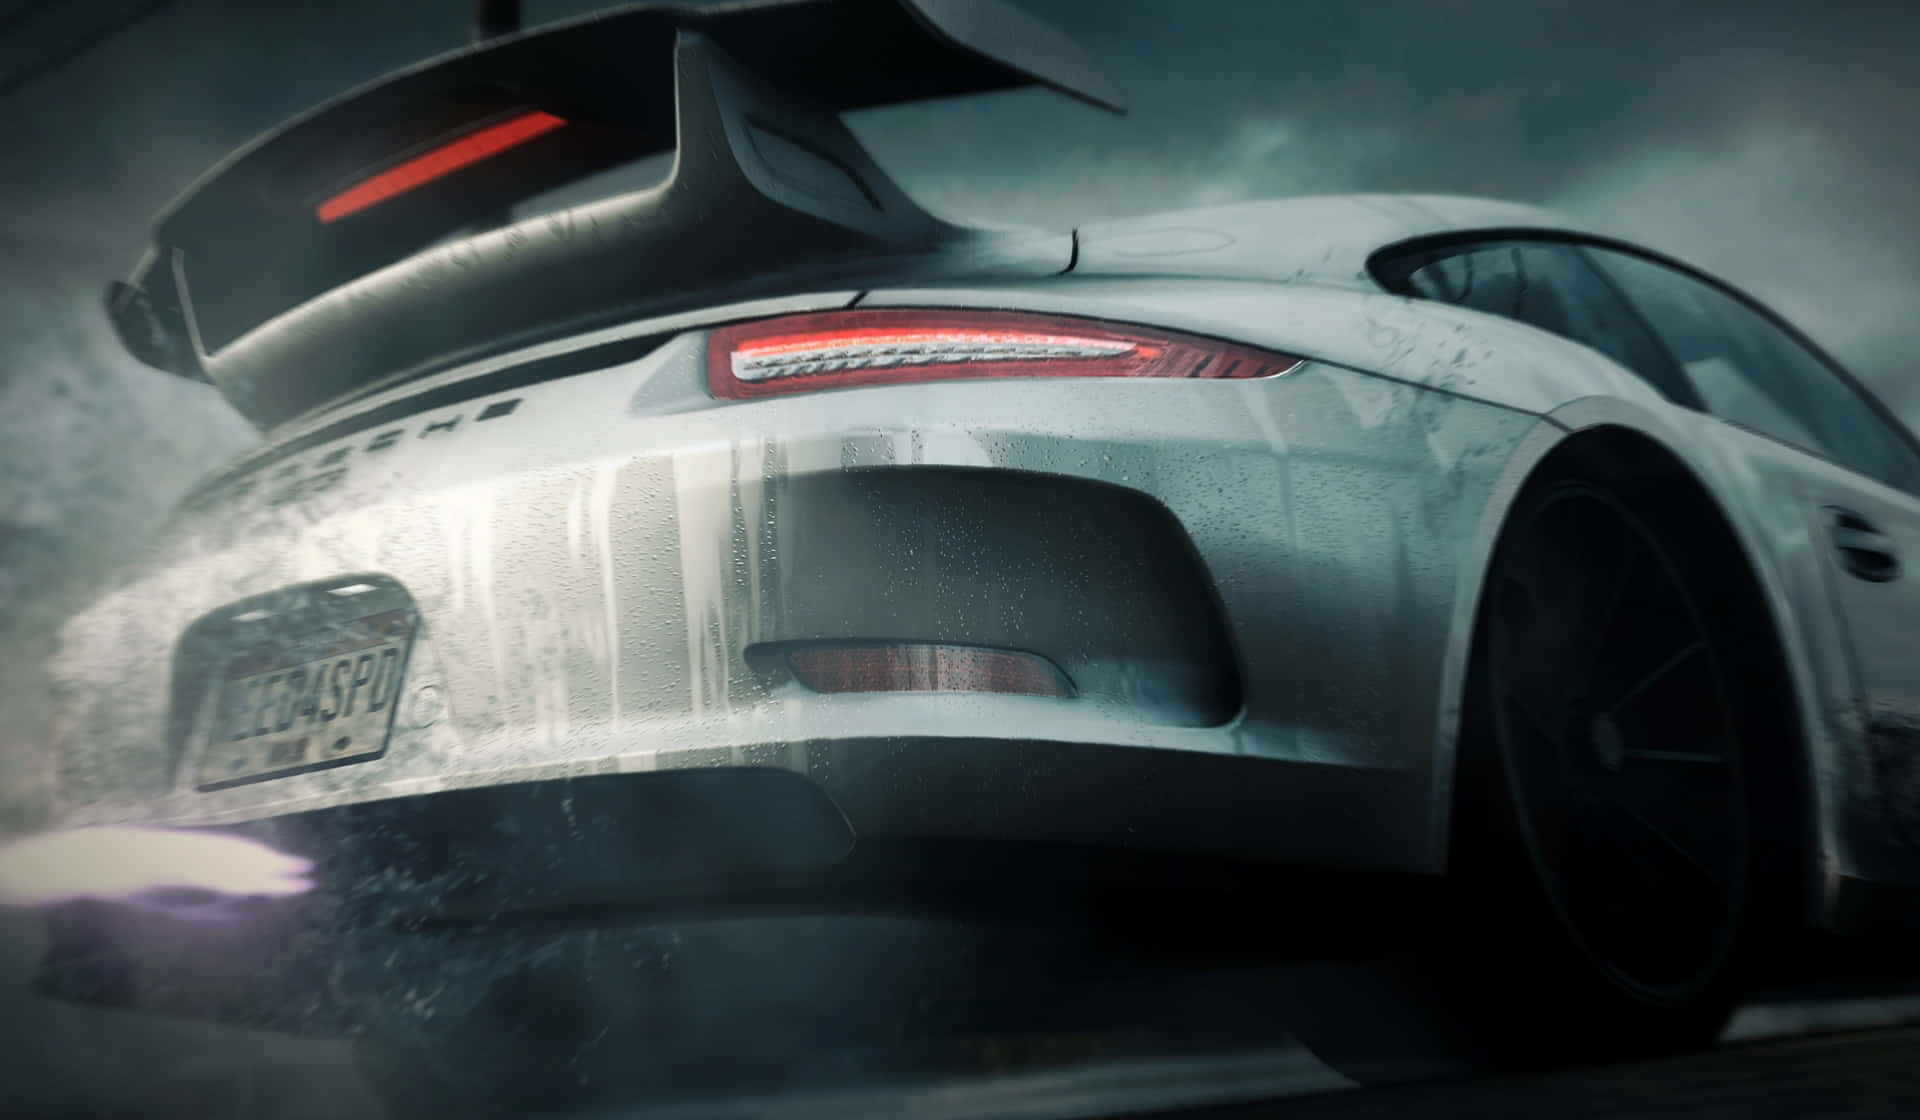 Exhilarating Need For Speed PC Game Action Wallpaper